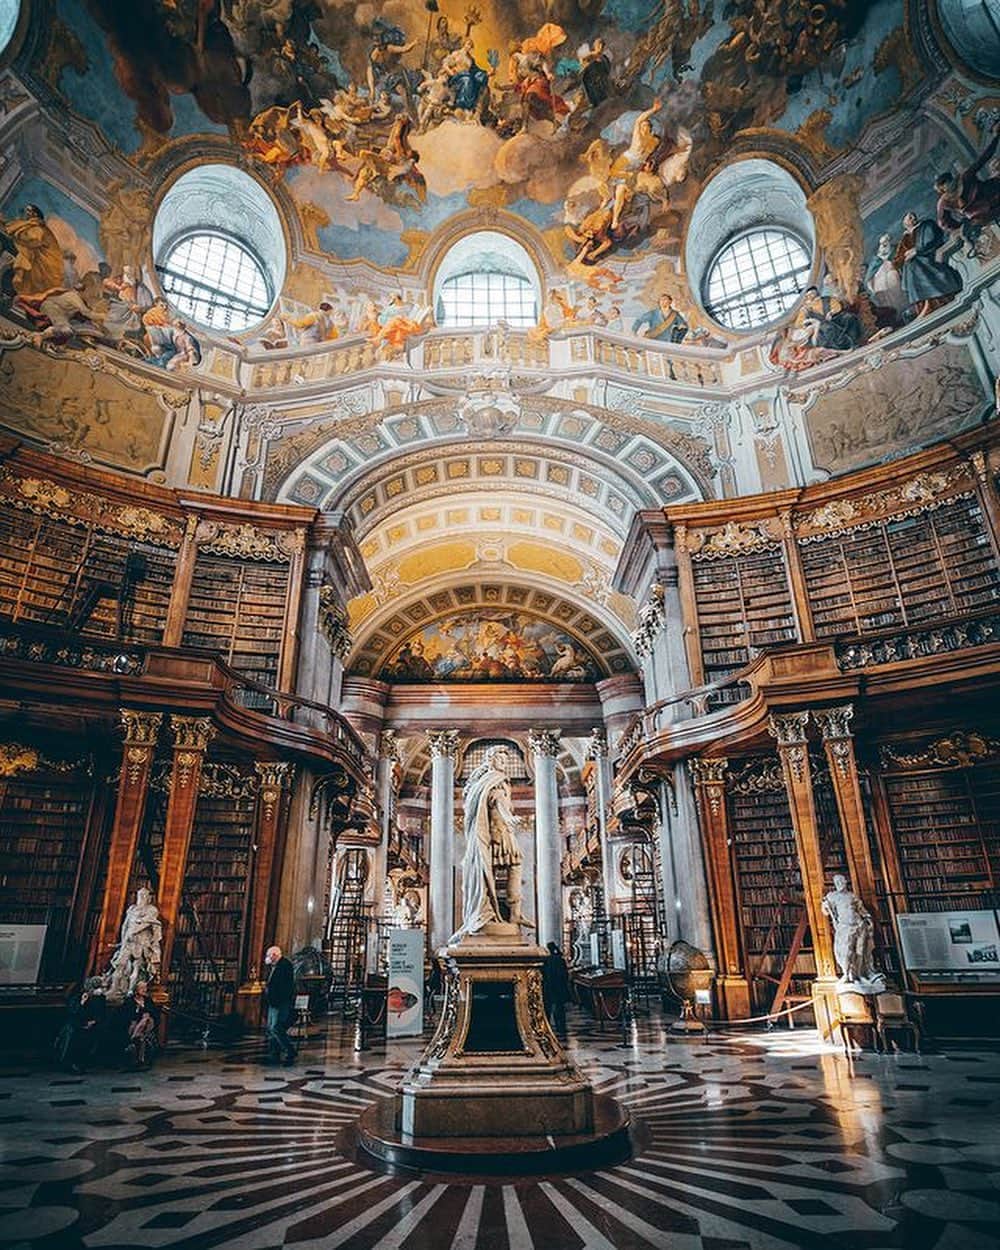 Wien | Viennaのインスタグラム：「You should visit this breathtaking place this weekend! 📚 The Grand Hall of the @nationalbibliothek certainly lives up to its name. At almost 80 meters long and 20 meters in height, it's truly a temple of knowledge. Built in the 18th century as part of the former Court Library, its elaborately decorated dome, numerous frescoes, towering bookshelves with their typical sliding ladders, and gold ornamentation create an opulent setting for the historic treasures it holds. 😍 It houses more than 200,000 volumes dating from 1501 to 1850. 📖 by @bilder_schmiede #ViennaNow  #library #architecture #vienna #vienna_austria #travelgram」